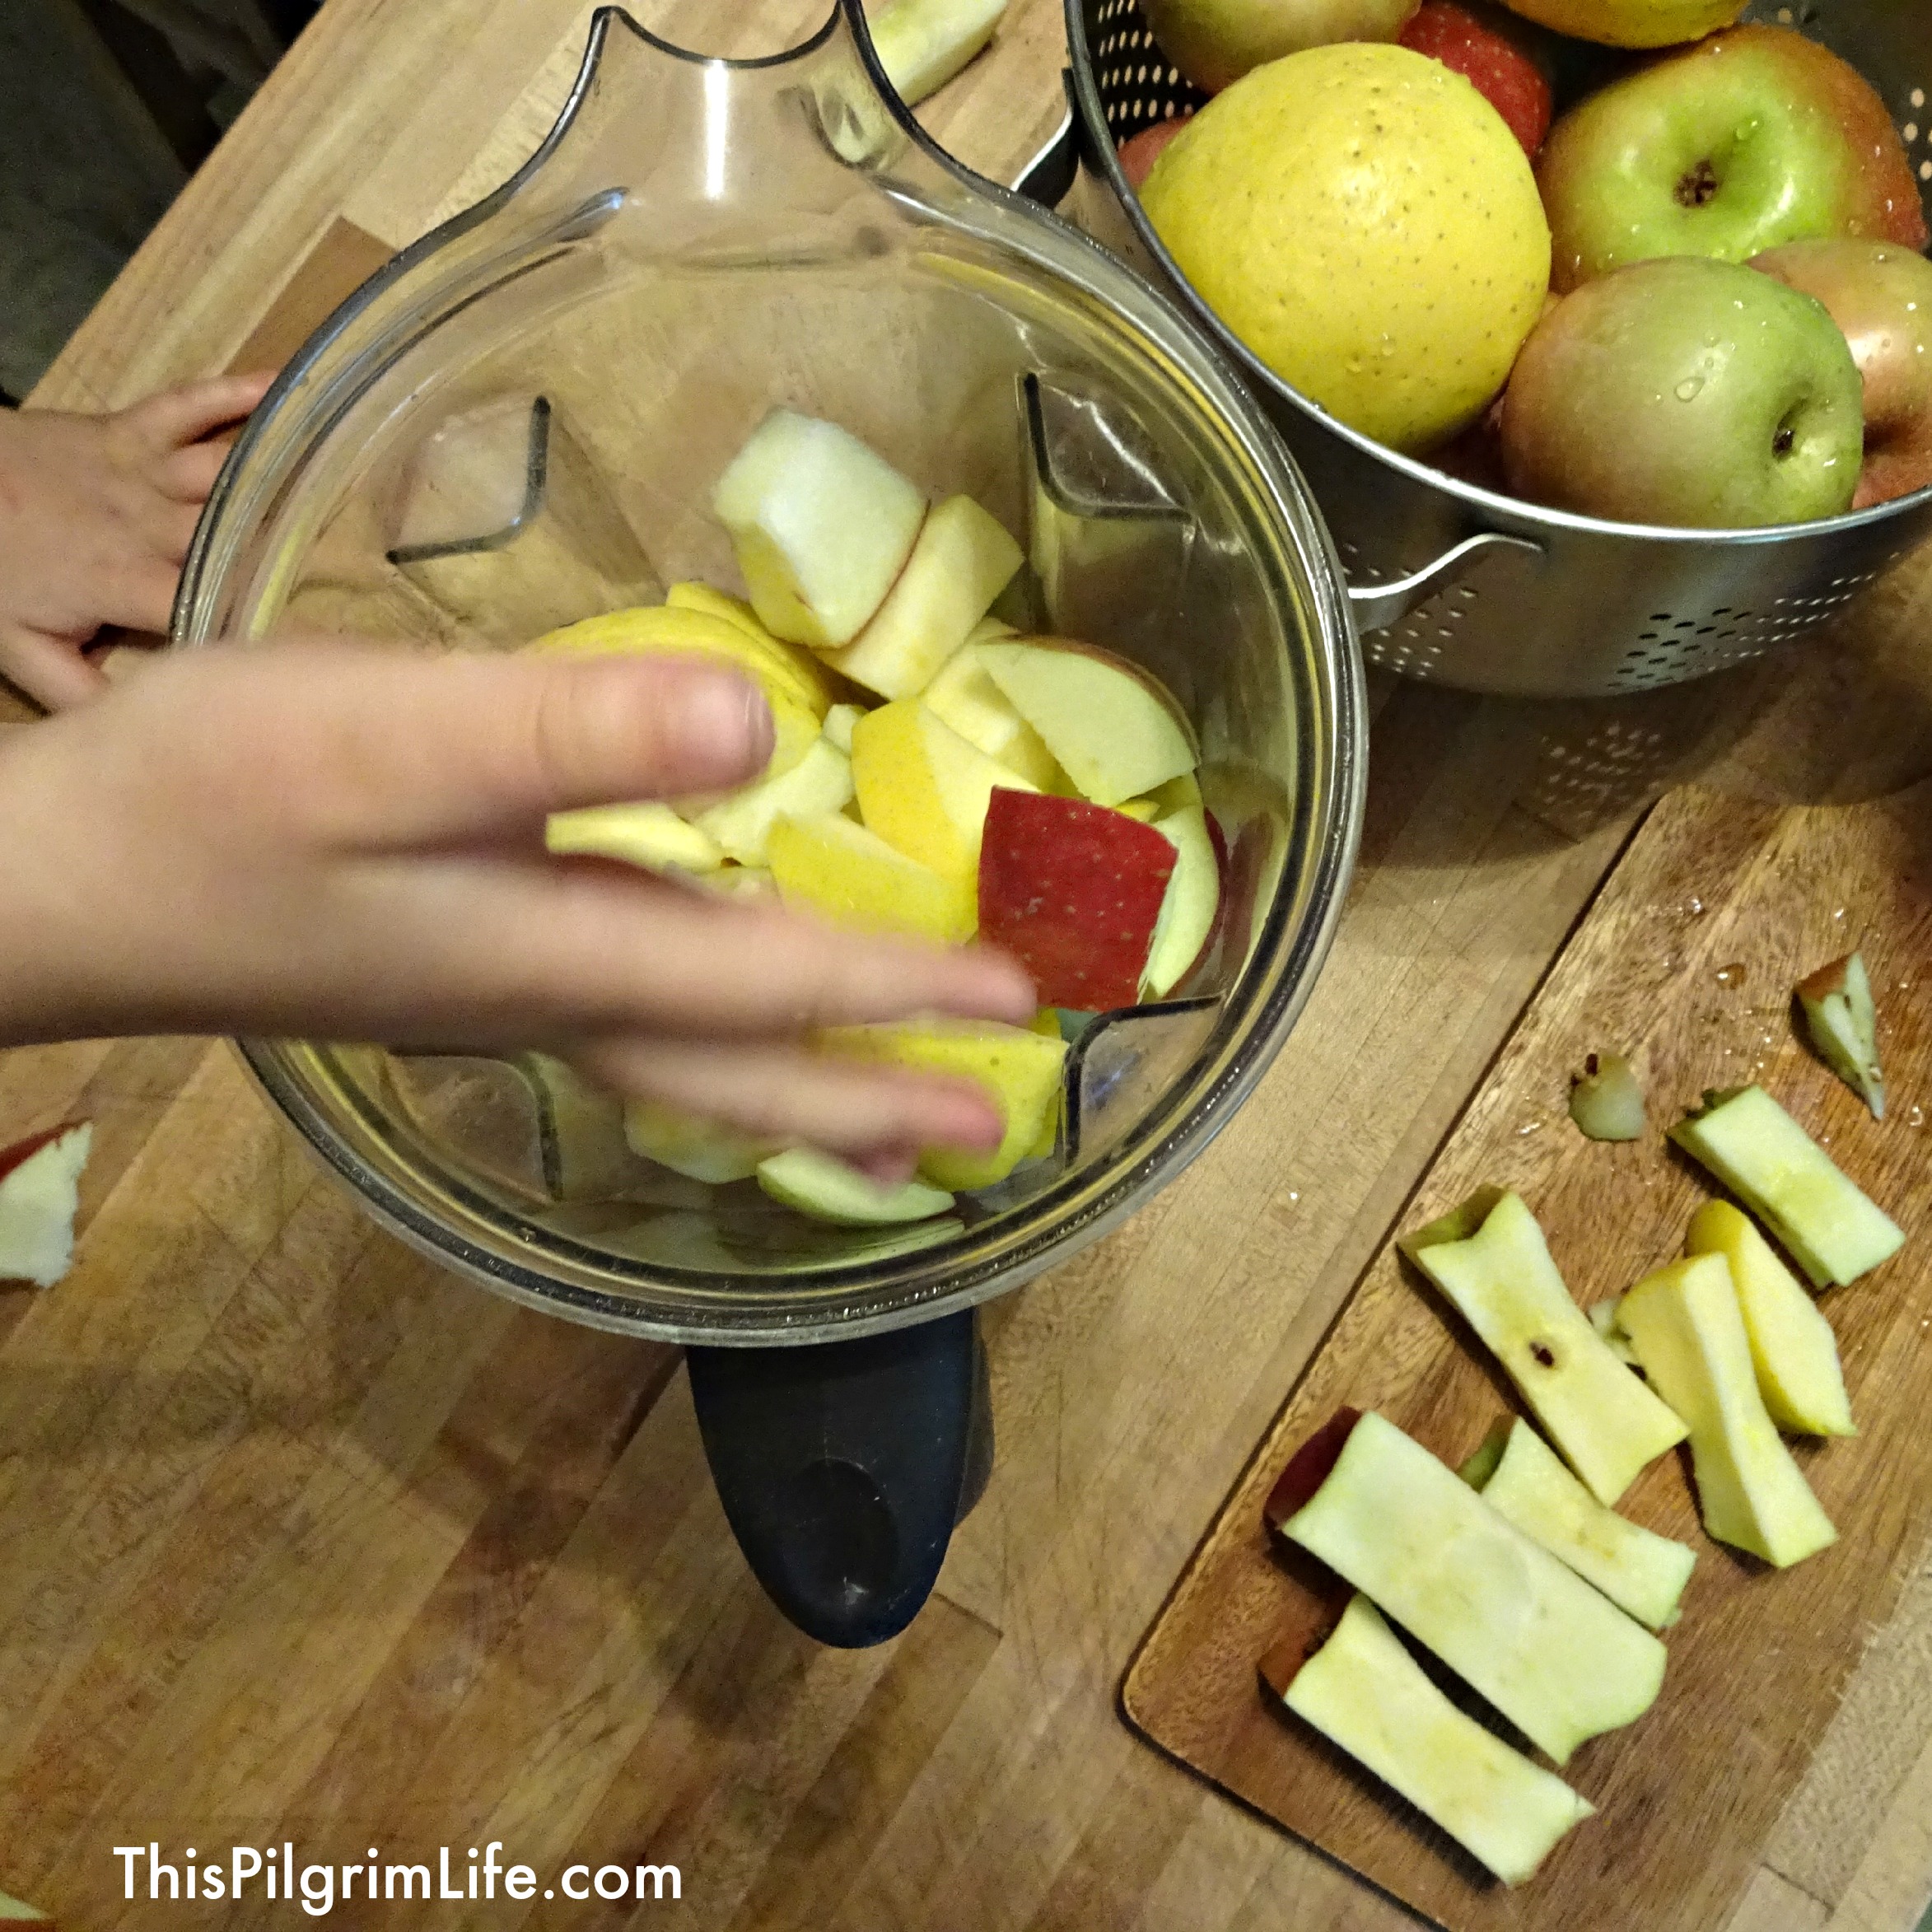 Apple cider is a delicious Fall treat. Check out these easy steps to make your own homemade apple cider! 